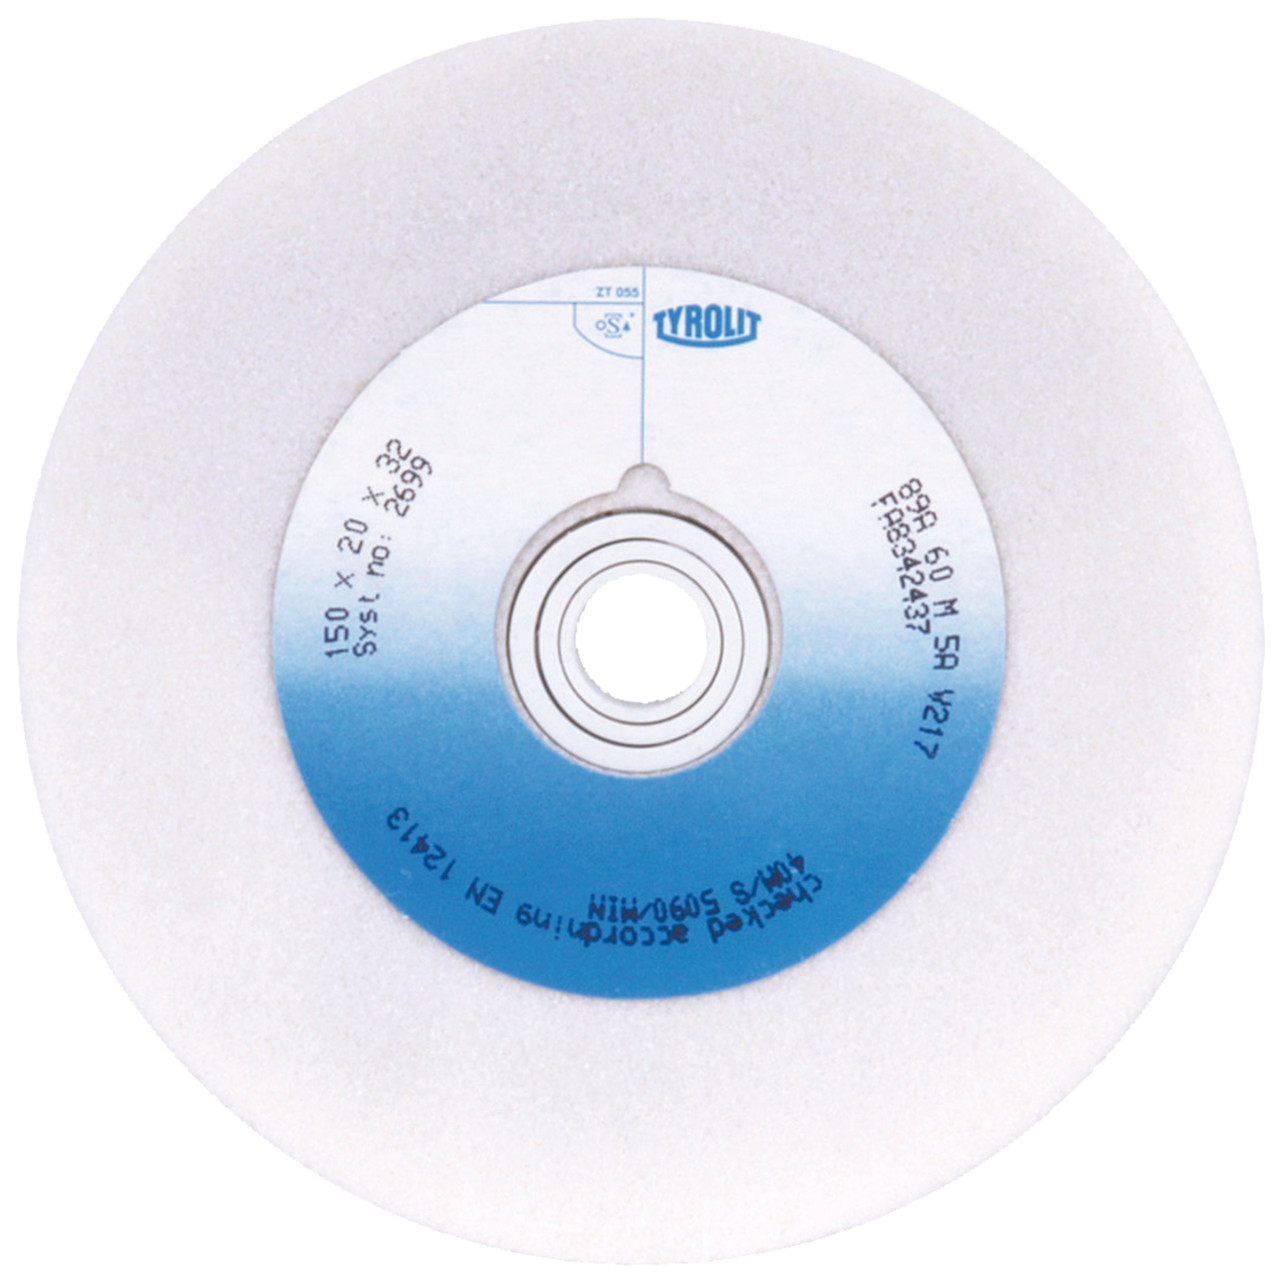 TYROLIT conventional ceramic grinding wheels DxDxH 150x20x32 For high-alloy steels and HSS, shape: 1, Art. 2699